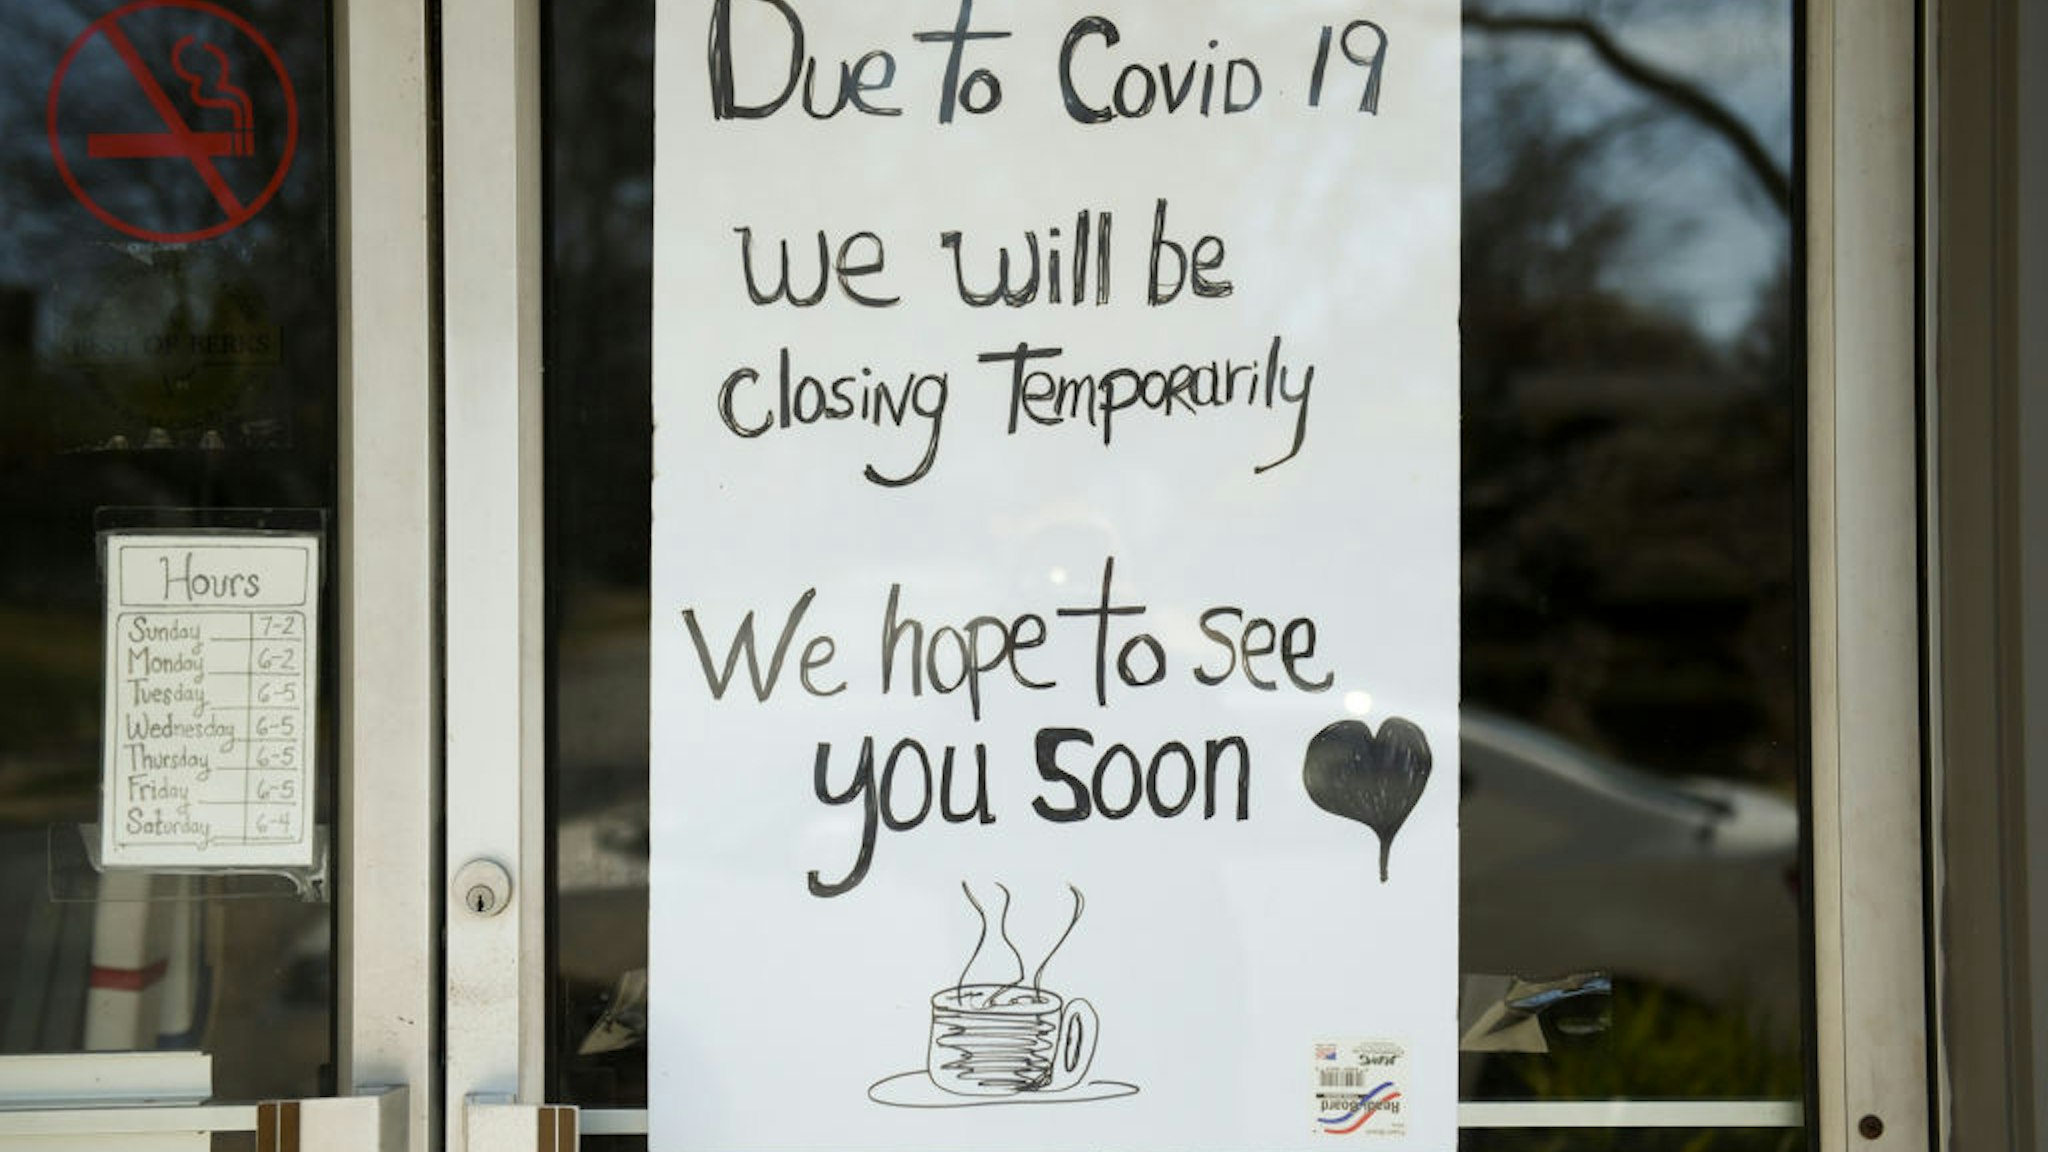 Wyomissing, PA - April 6: A sign in the window of Dosie Dough Bakery reads, 'Due to Covid 19 we will be closing temporarily. We hope to see you soon,"' on April 6, 2020(Photo by Lauren A. Little/MediaNews Group/Reading Eagle via Getty Images)